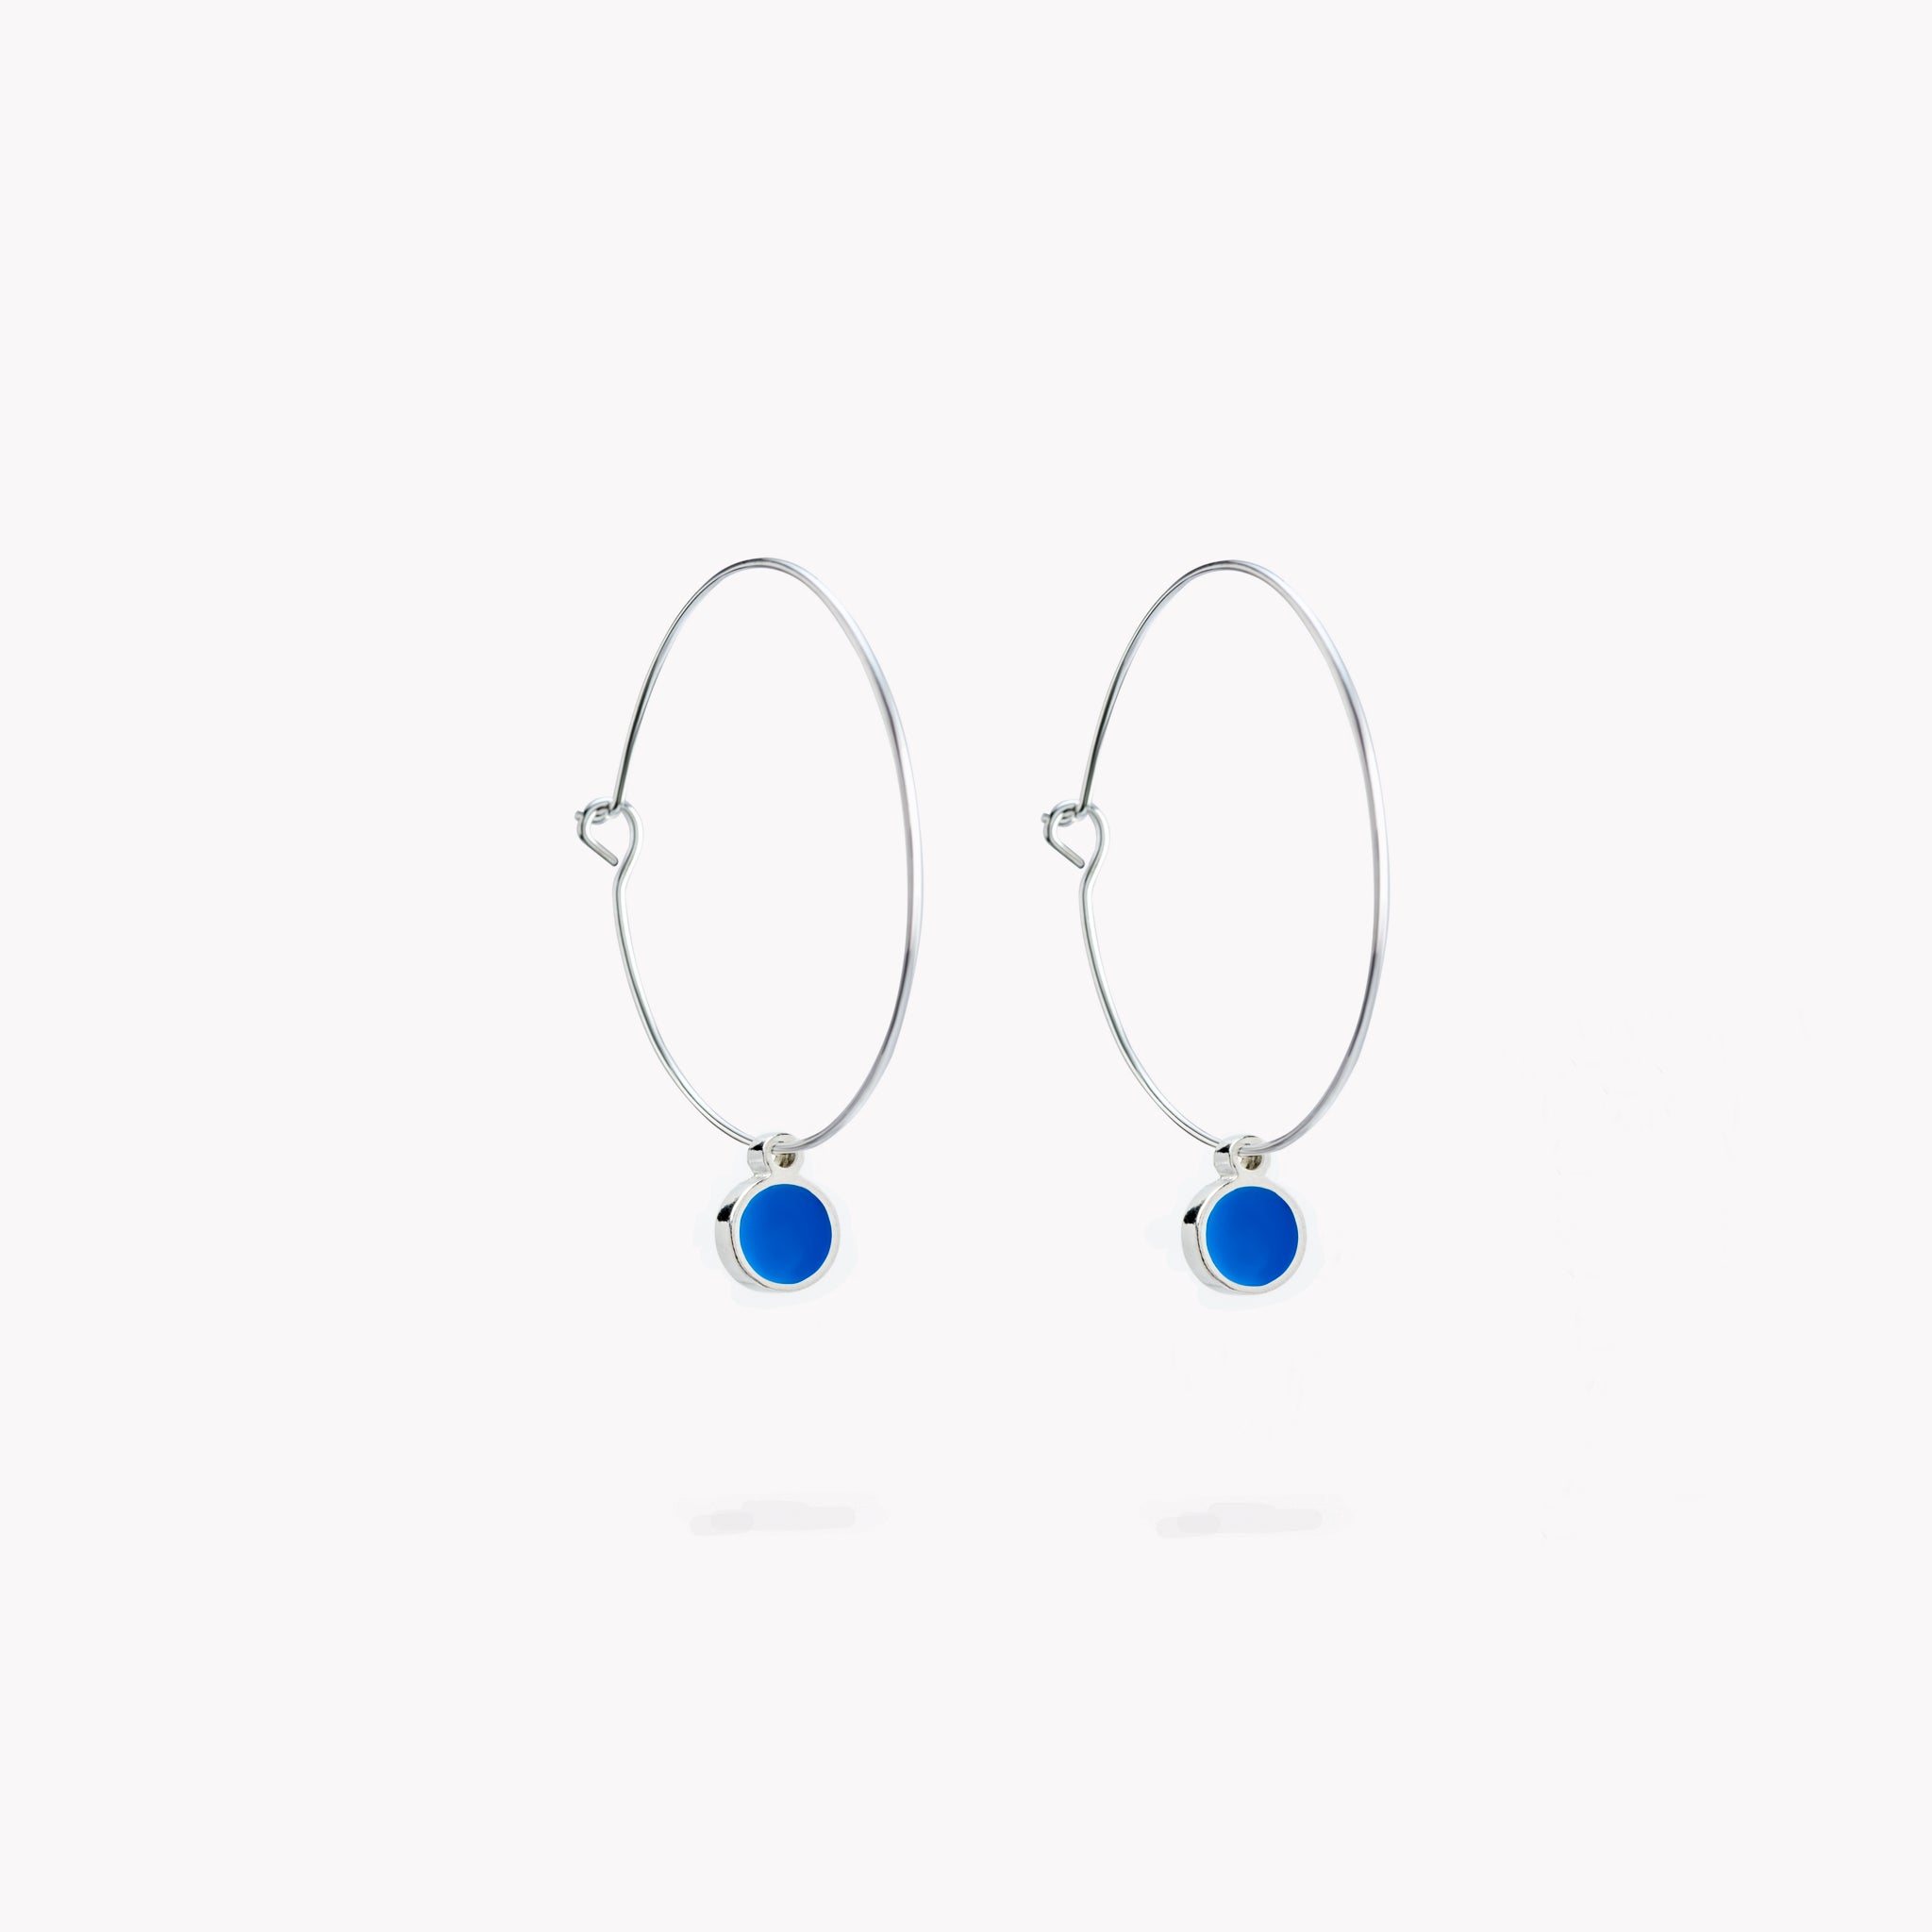 A pair of simple hoop earrings, each with a bright blue hanging circular form.